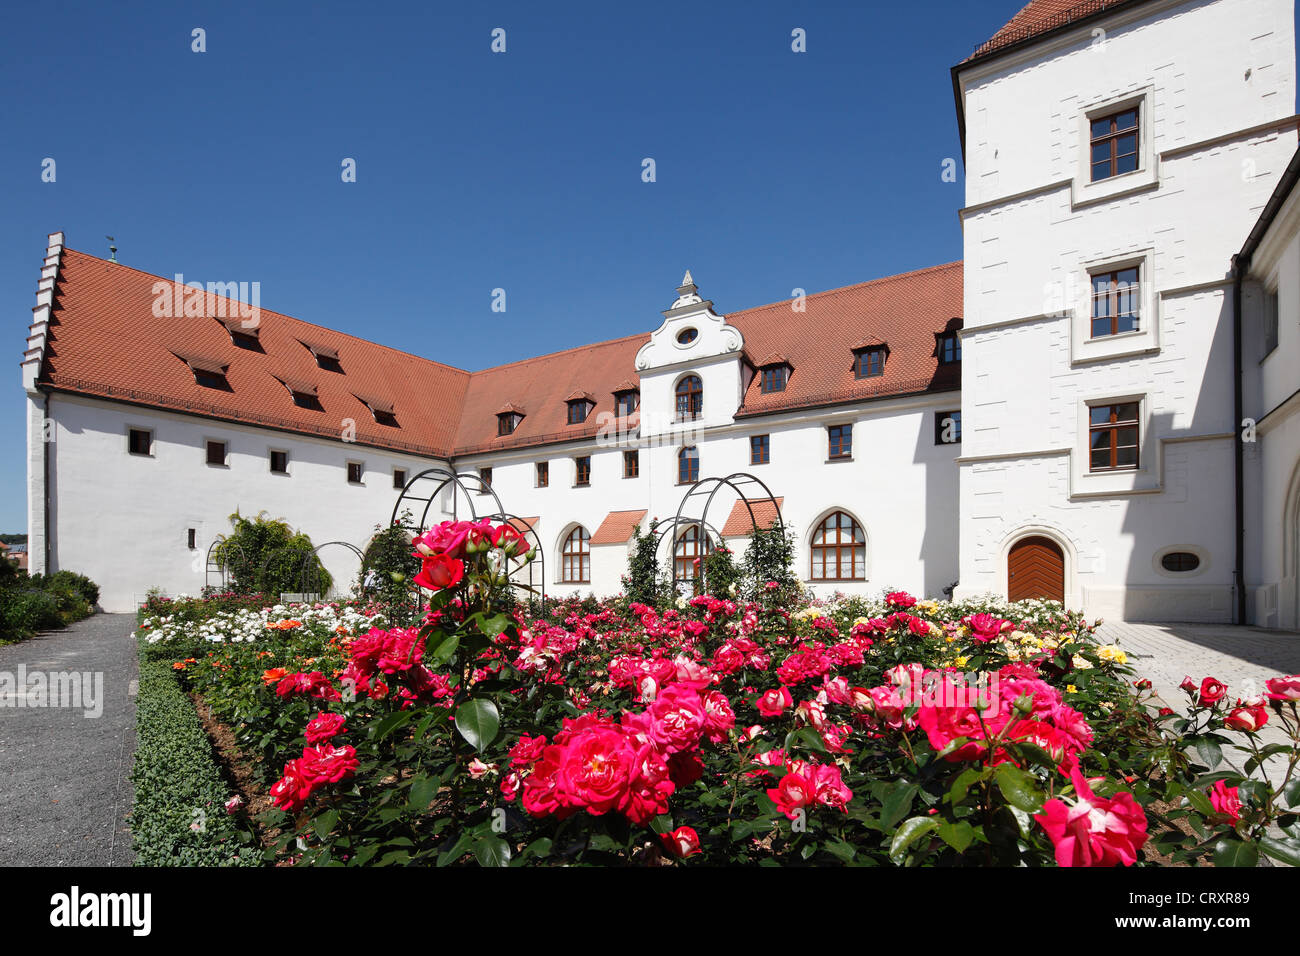 Germany, Bavaria, Amberg, View of arsenal and rose garden Stock Photo